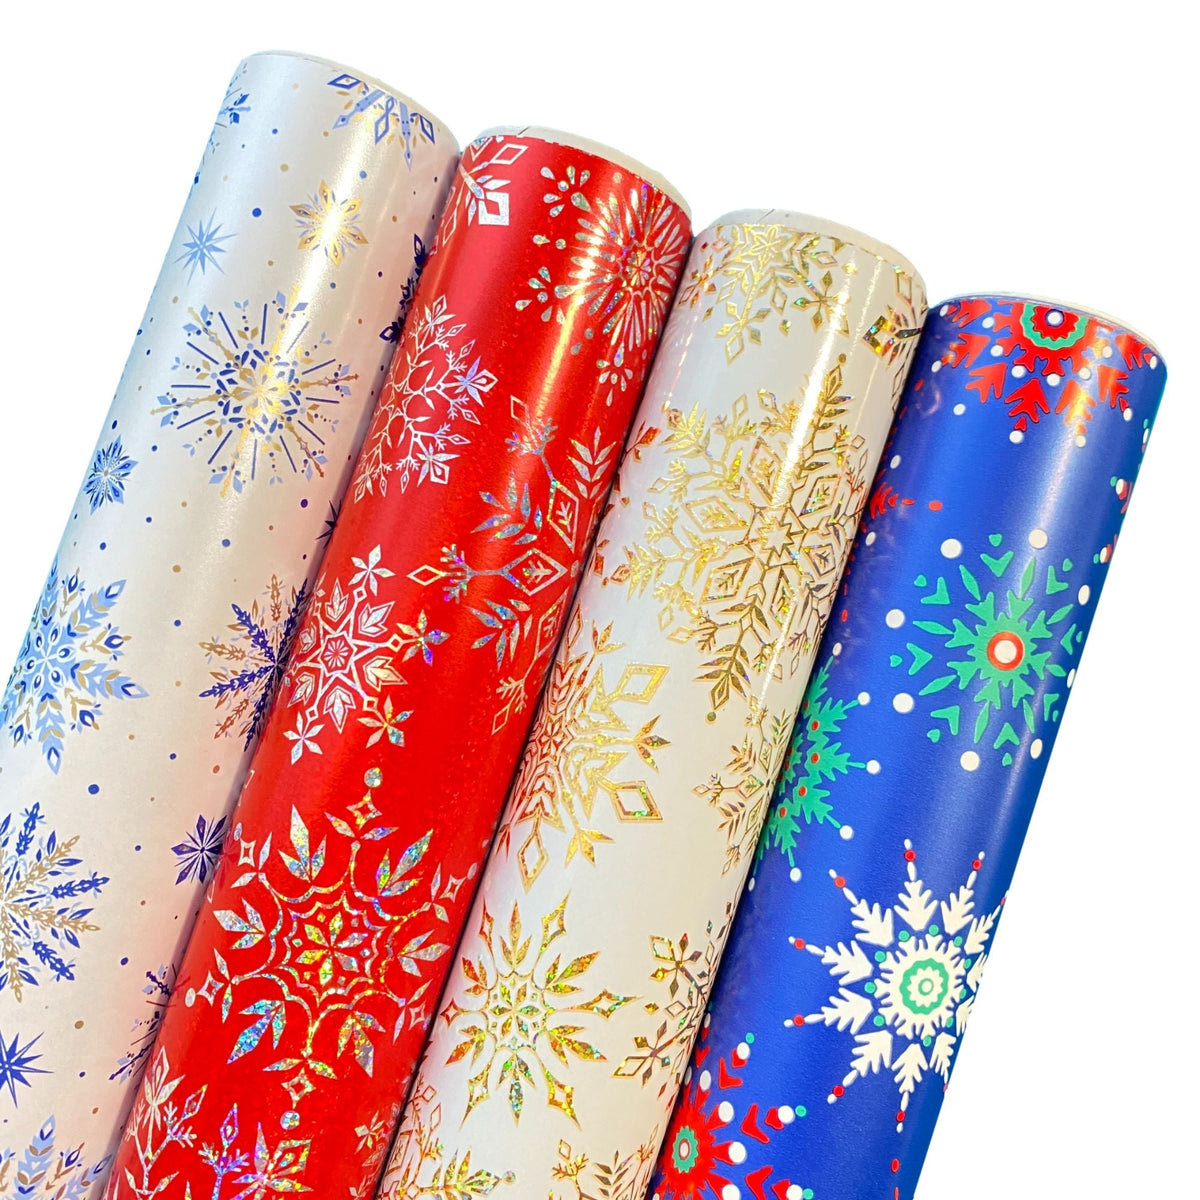 1X2M CHRISTMAS FOIL Wrapping Paper Roll Plain Metallic Gift Wrap